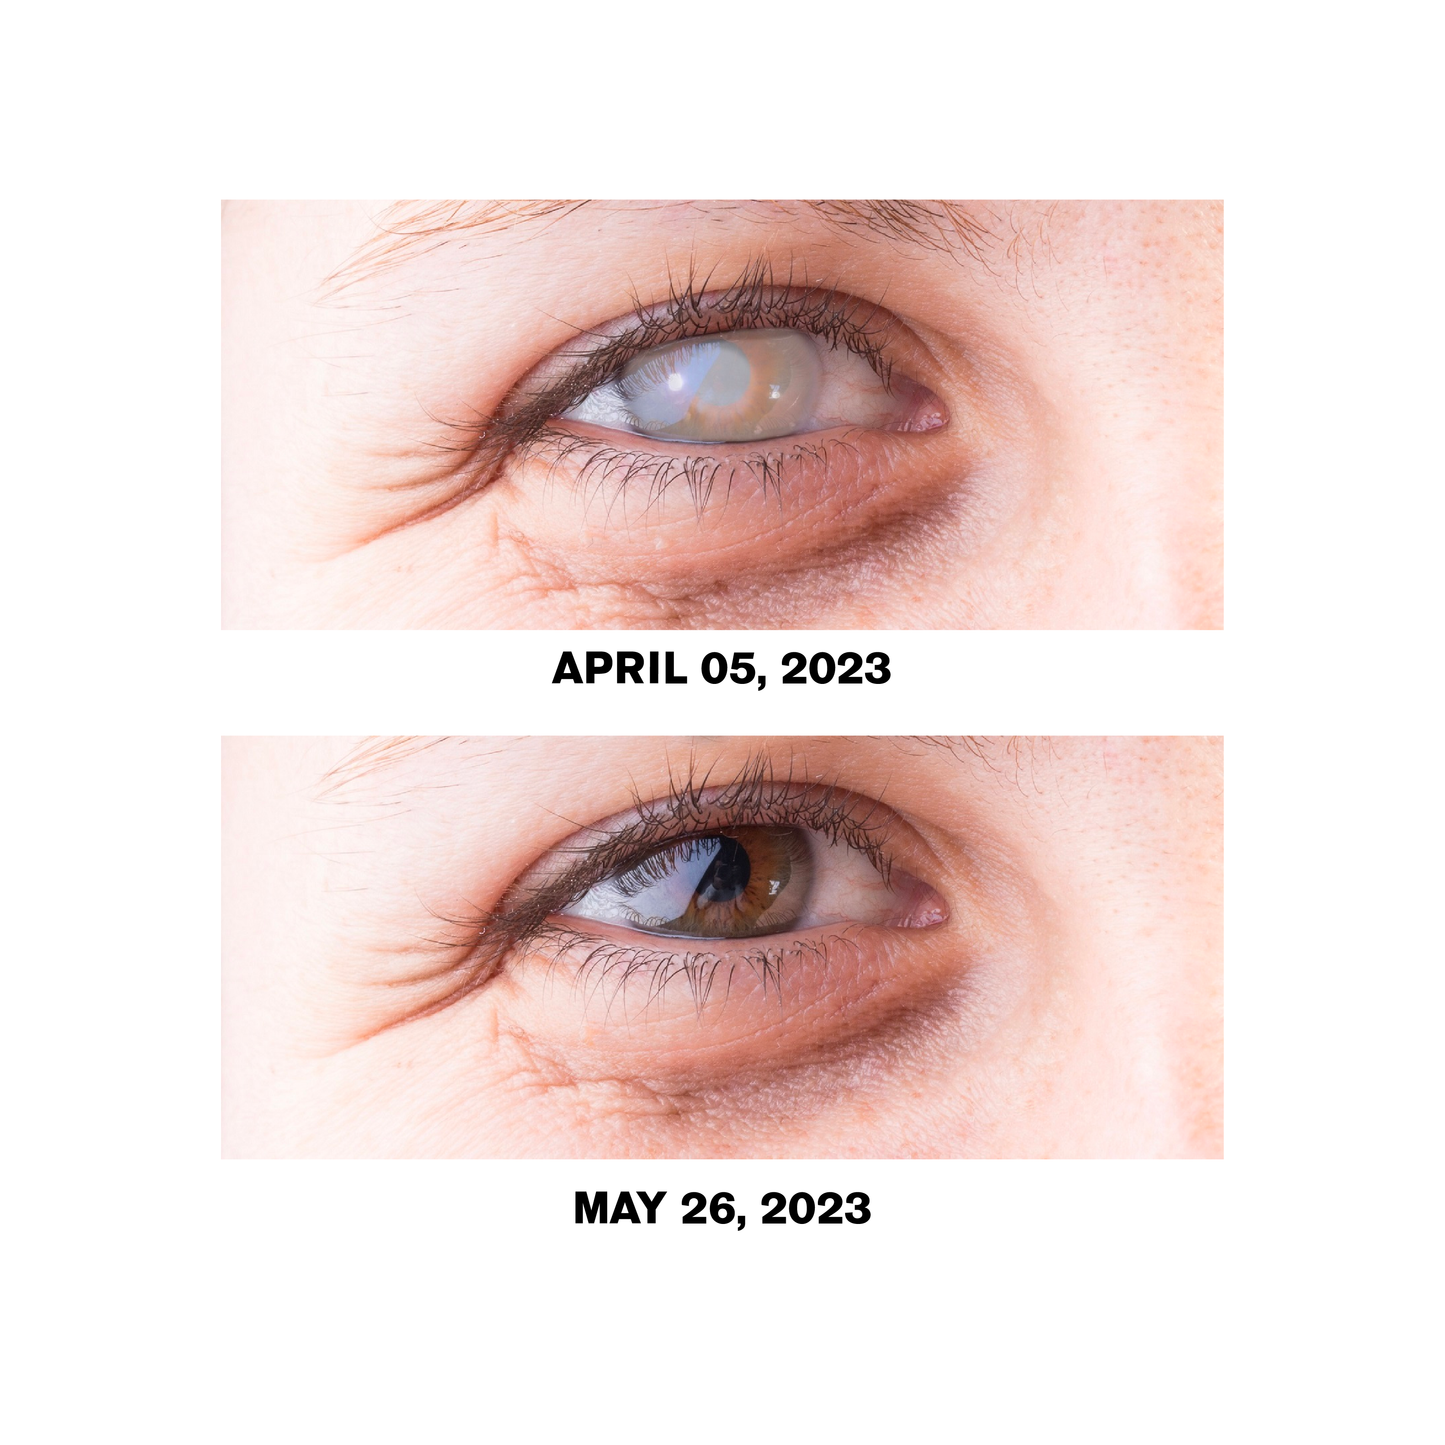 Ourlyard™ Treatment EyeProblems SolutionDrops